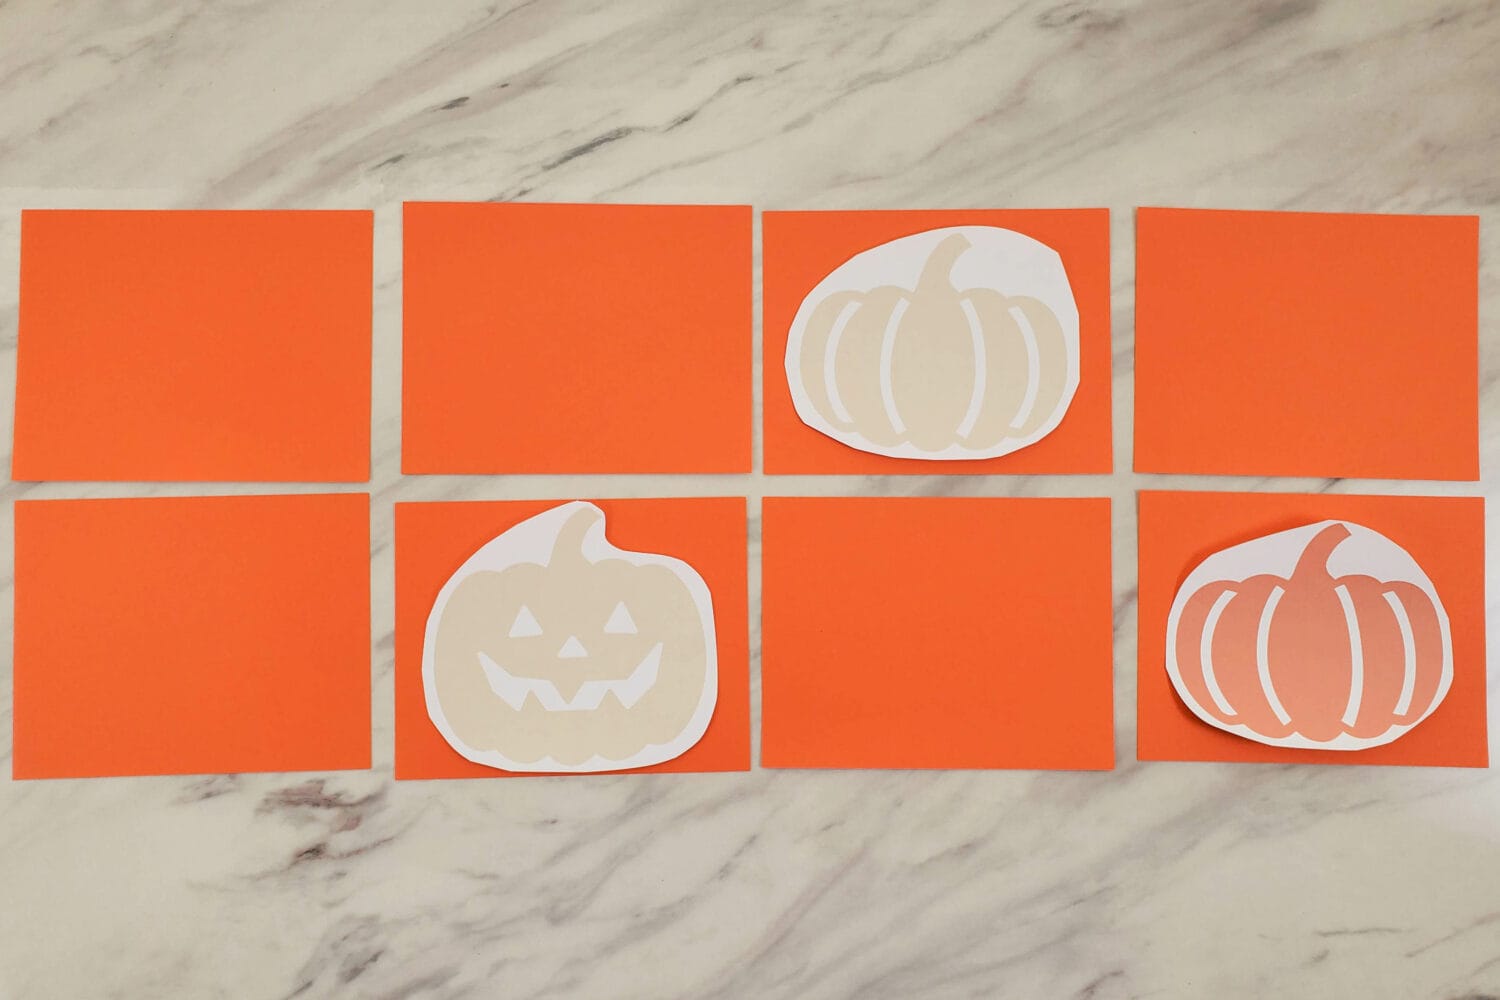 Fall & Halloween Pumpkin Patch Game printable activity for Singing Time! 6 fun ways to use our cute pumpkin printables or mini pumpkins as a learning activity for teaching music ideas for LDS Primary Music Leaders.